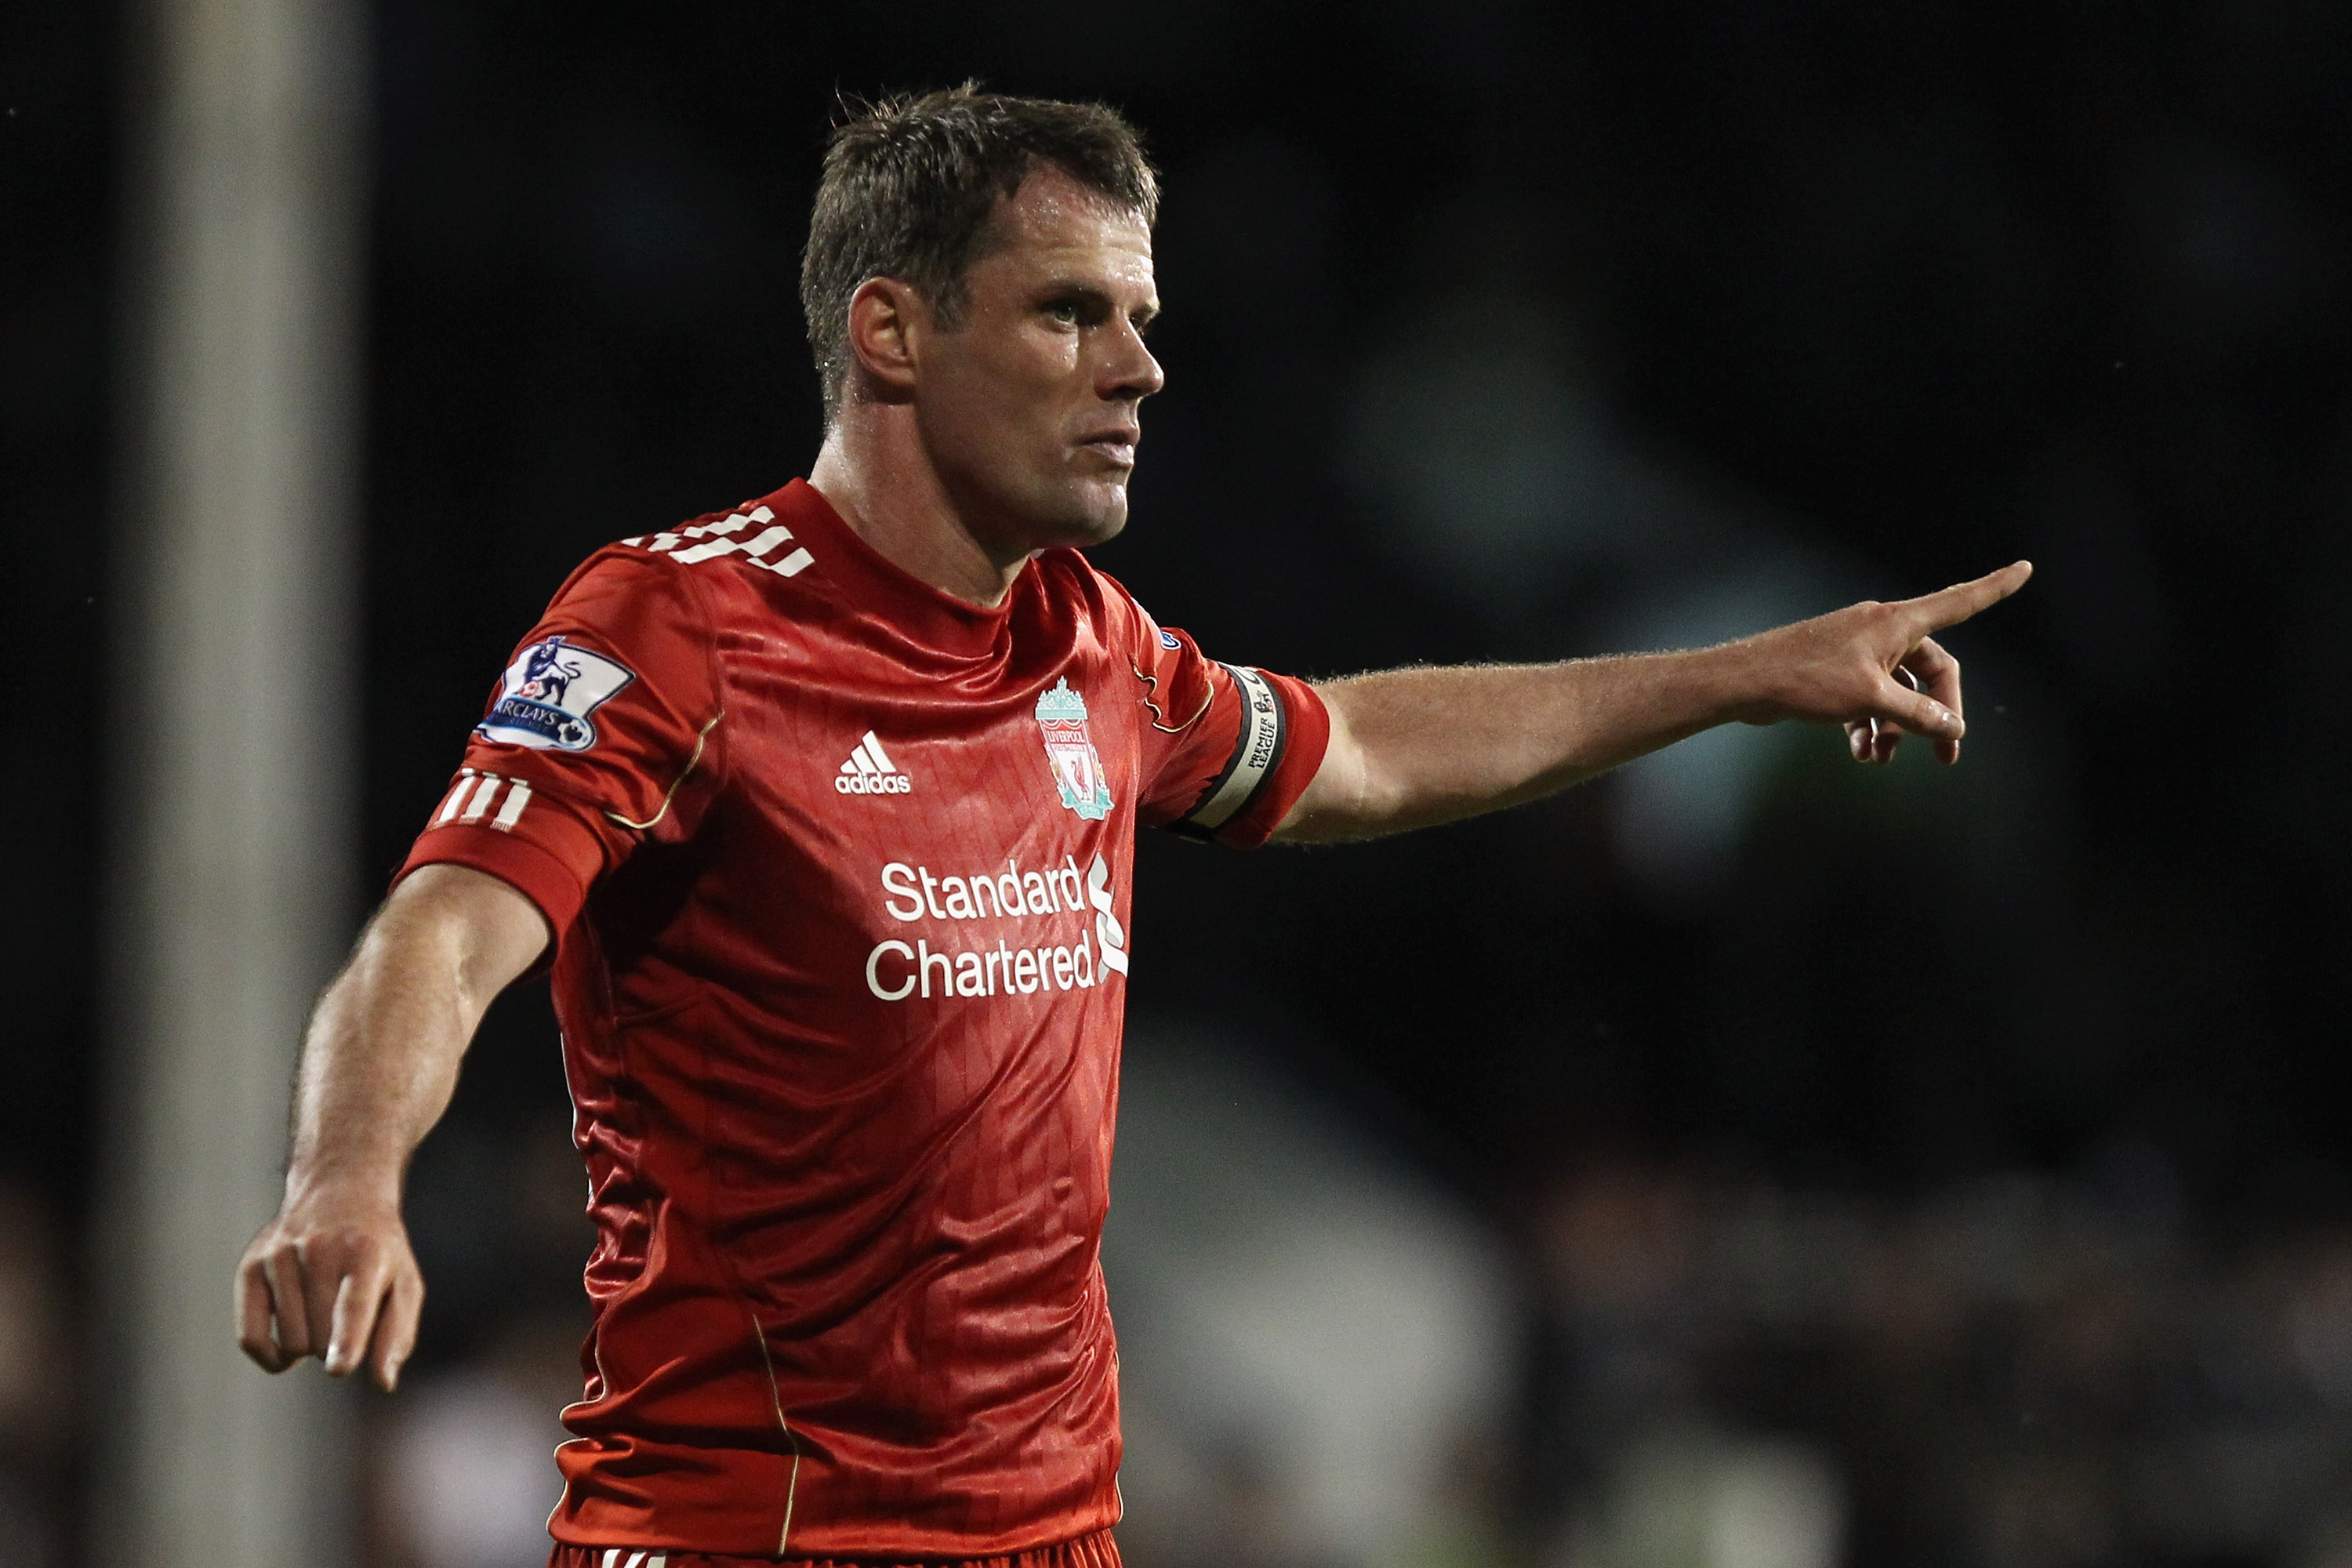 LONDON, ENGLAND - MAY 09:  Jamie Carragher of Liverpool gives instructions during the Barclays Premier League match between Fulham and Liverpool at Craven Cottage on May 9, 2011 in London, England.  (Photo by Scott Heavey/Getty Images)